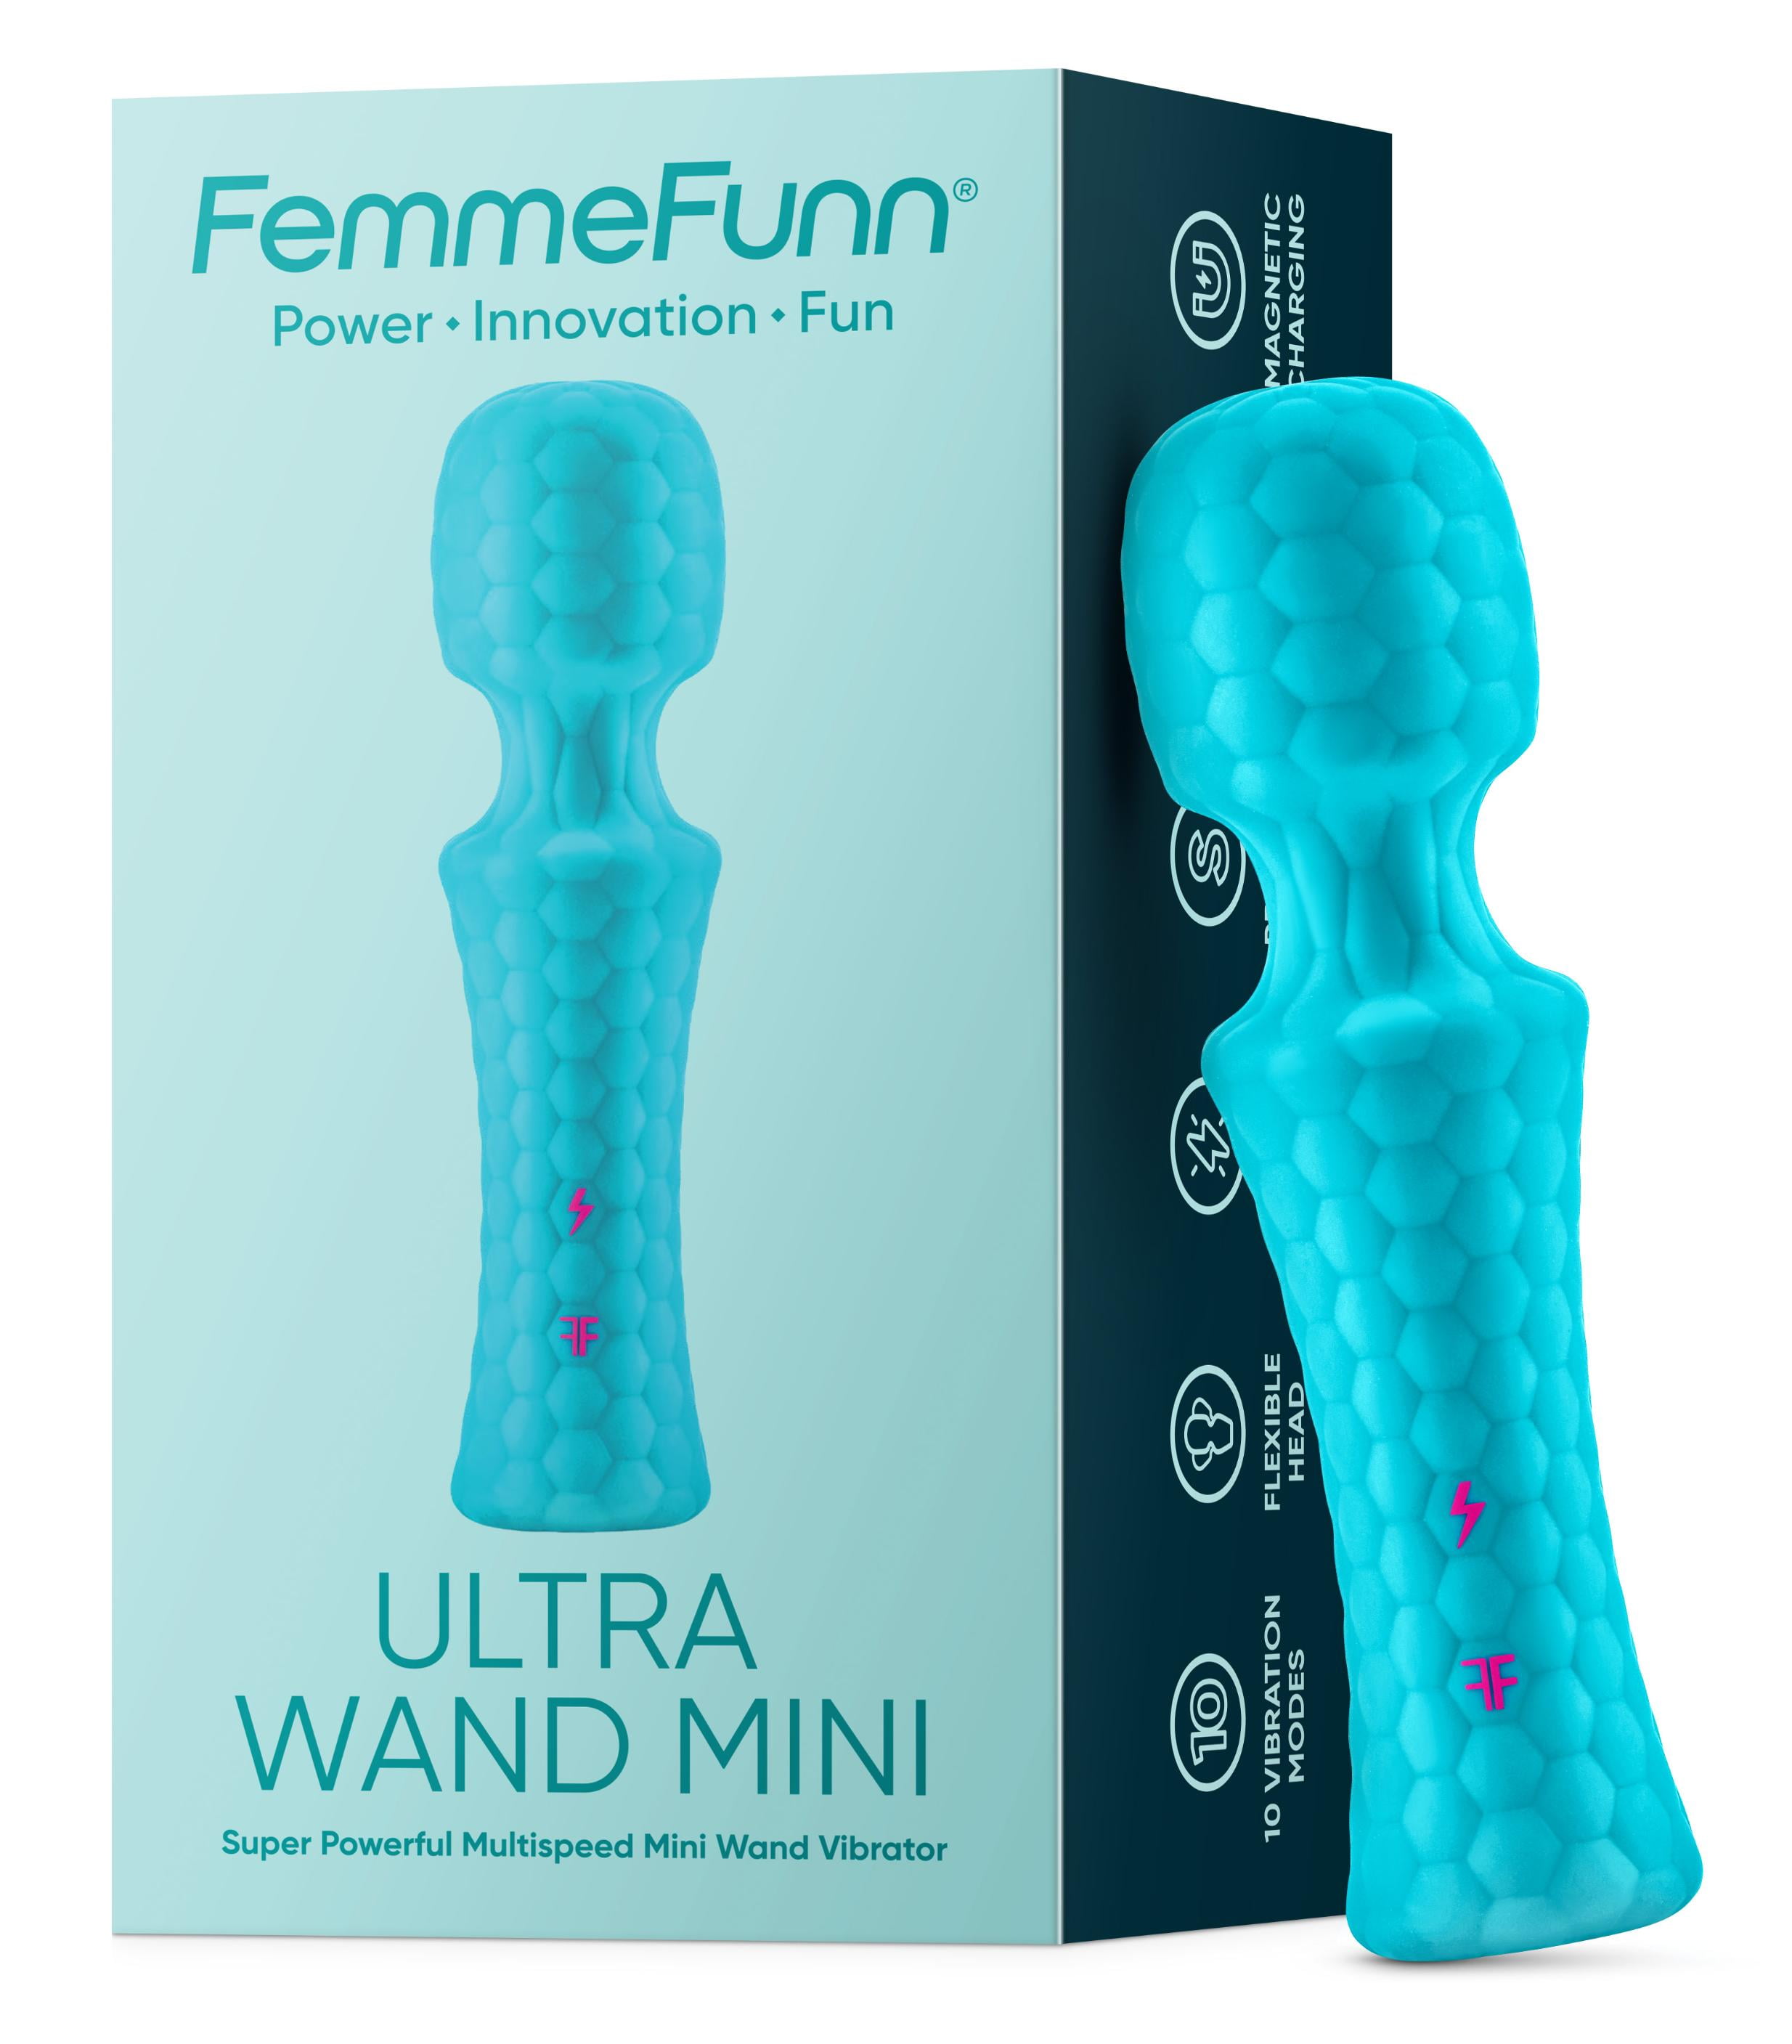 Femme Funn Small Lightweight-100% Waterproof-Body Safe Silicone -Flexible  Head - 10 Vibration Patterns- Adult Sex Toy Personal Rechargeable Sexual  Pleasure Wand Massager for Women 